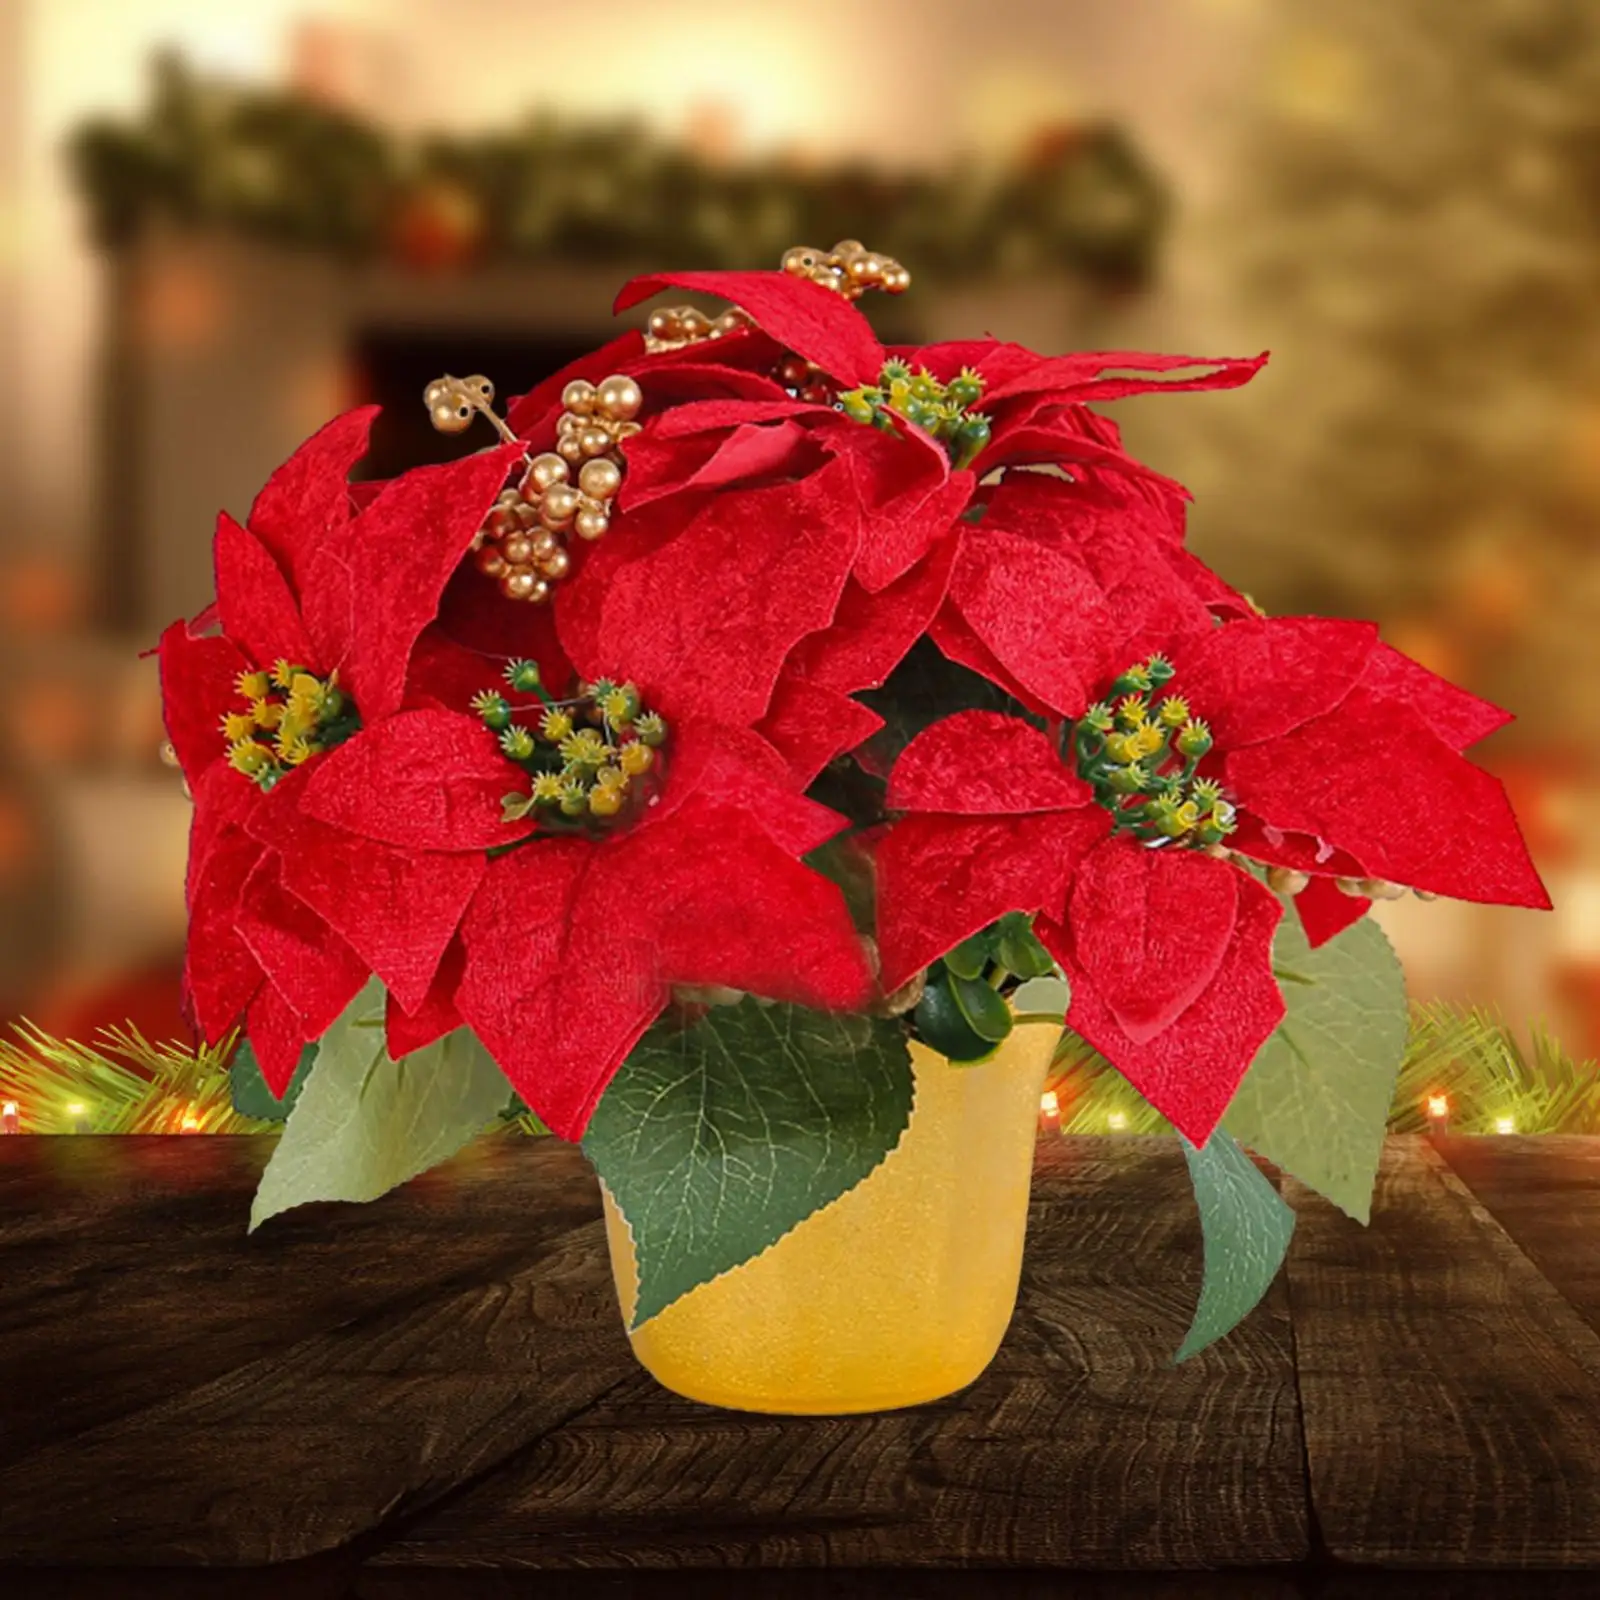 Potted Red Poinsettia Plant Christmas Artificial Poinsettia Plant Ornament for Desk Office Festival Indoor Table Centerpiece